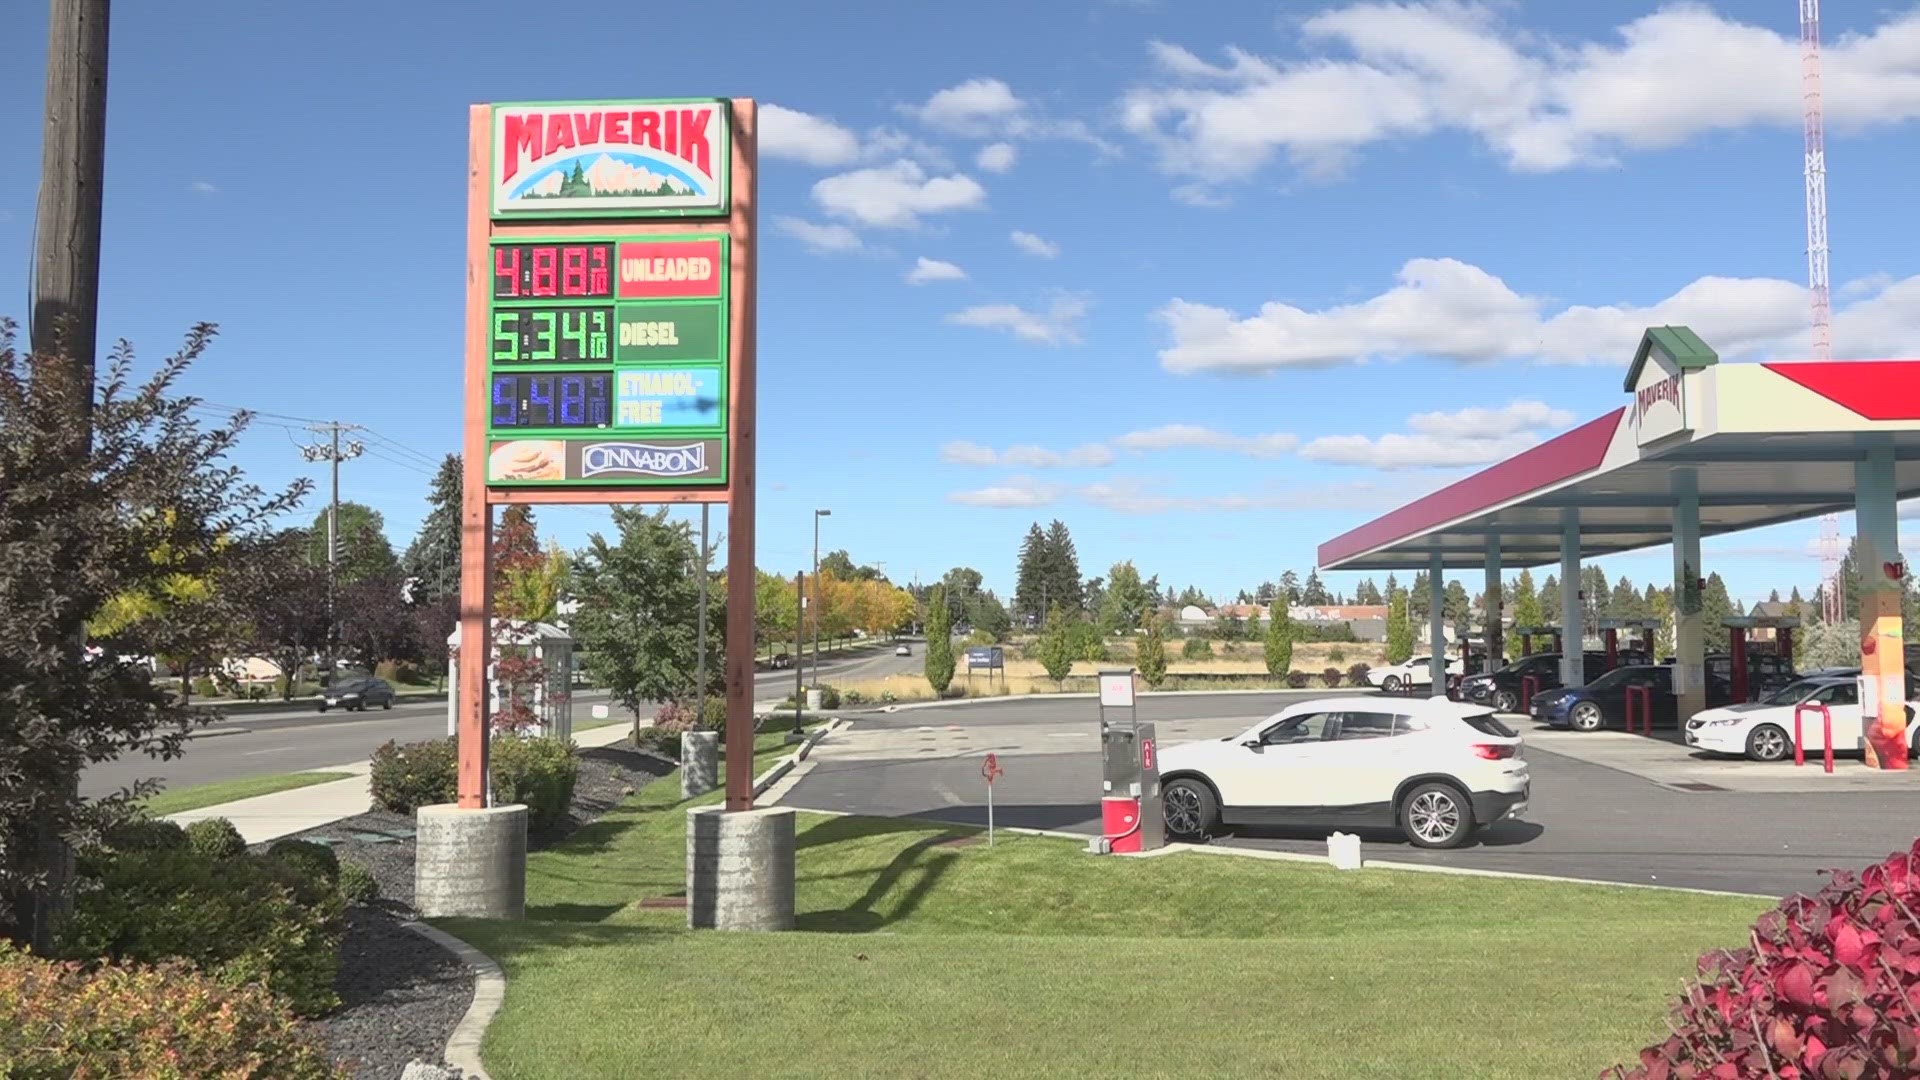 Gas analysts said Washington drivers should be prepared to potentially spend a bit more at the pump over the next few days.